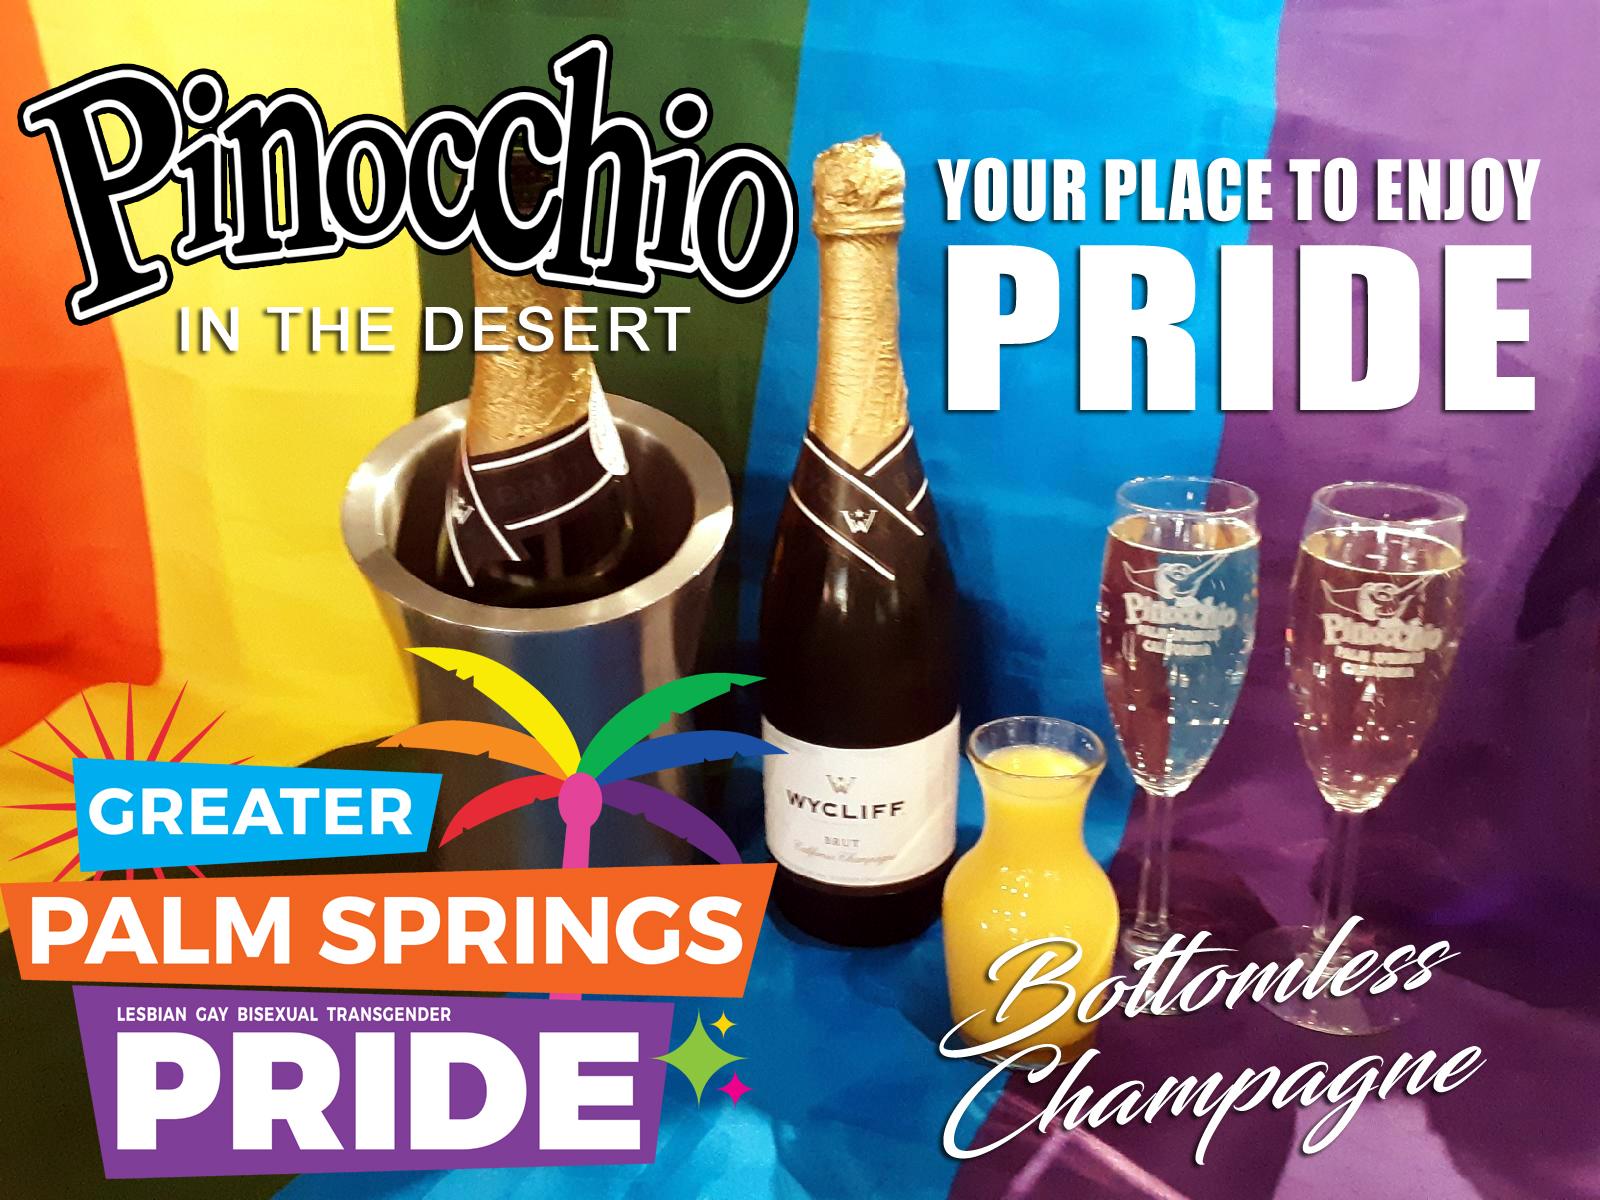 Pinocchio's your place to enjoy Greater Palm Springs PRIDE!